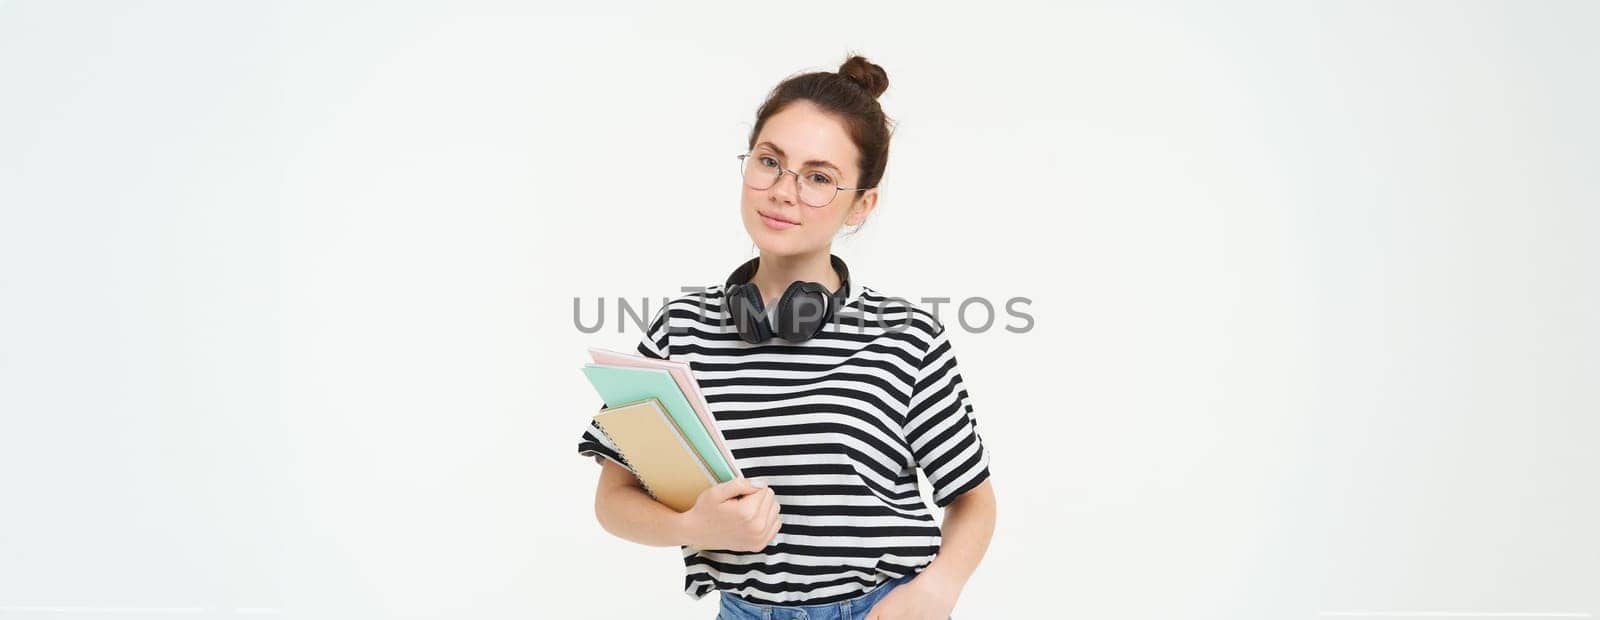 Education concept. Smiling brunette girl, student in casual clothes, holds her books, study material, wears headphones over neck, looks confident and happy, isolated over white background by Benzoix